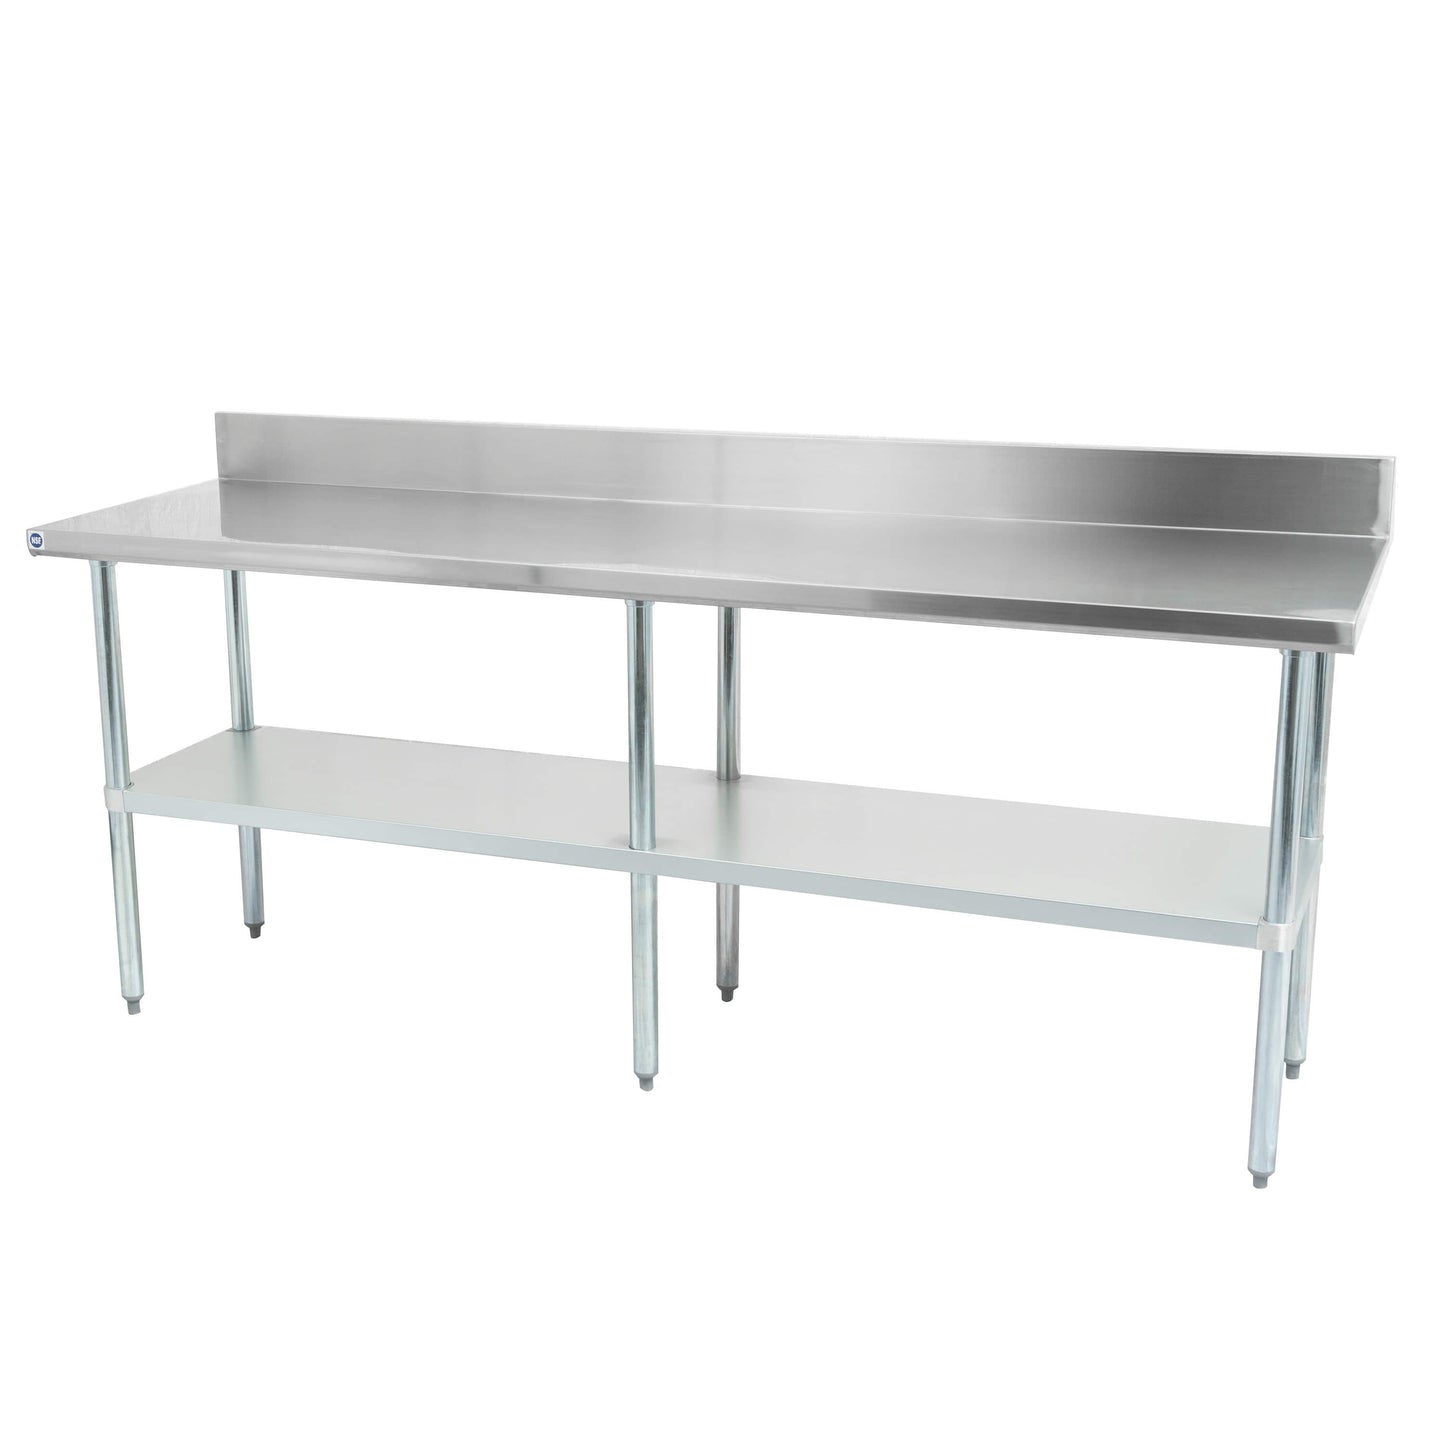 Thorinox DSST-2484-SS Table, 84"W x 24"D x 34"H, Stainless Steel Table with Stainless Steel Shelf